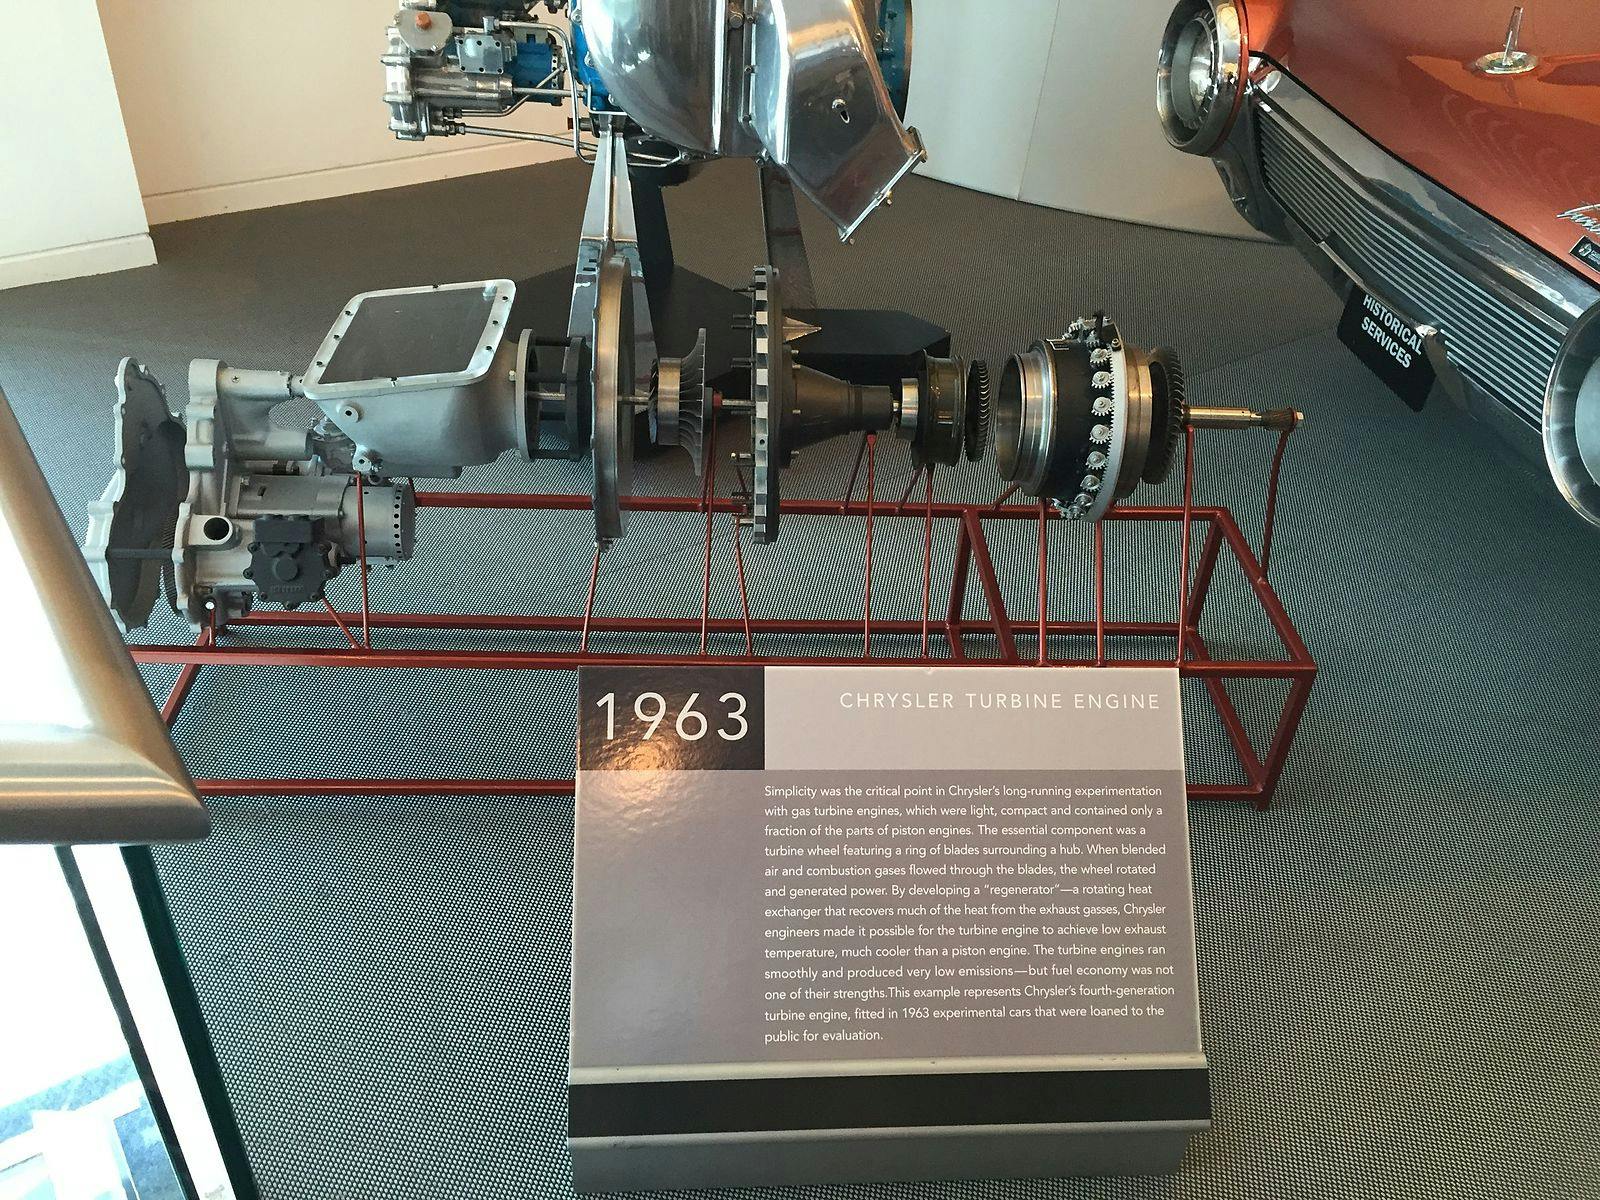 Exploded view of the A831 gas turbine at the Walter P. Chrysler Museum